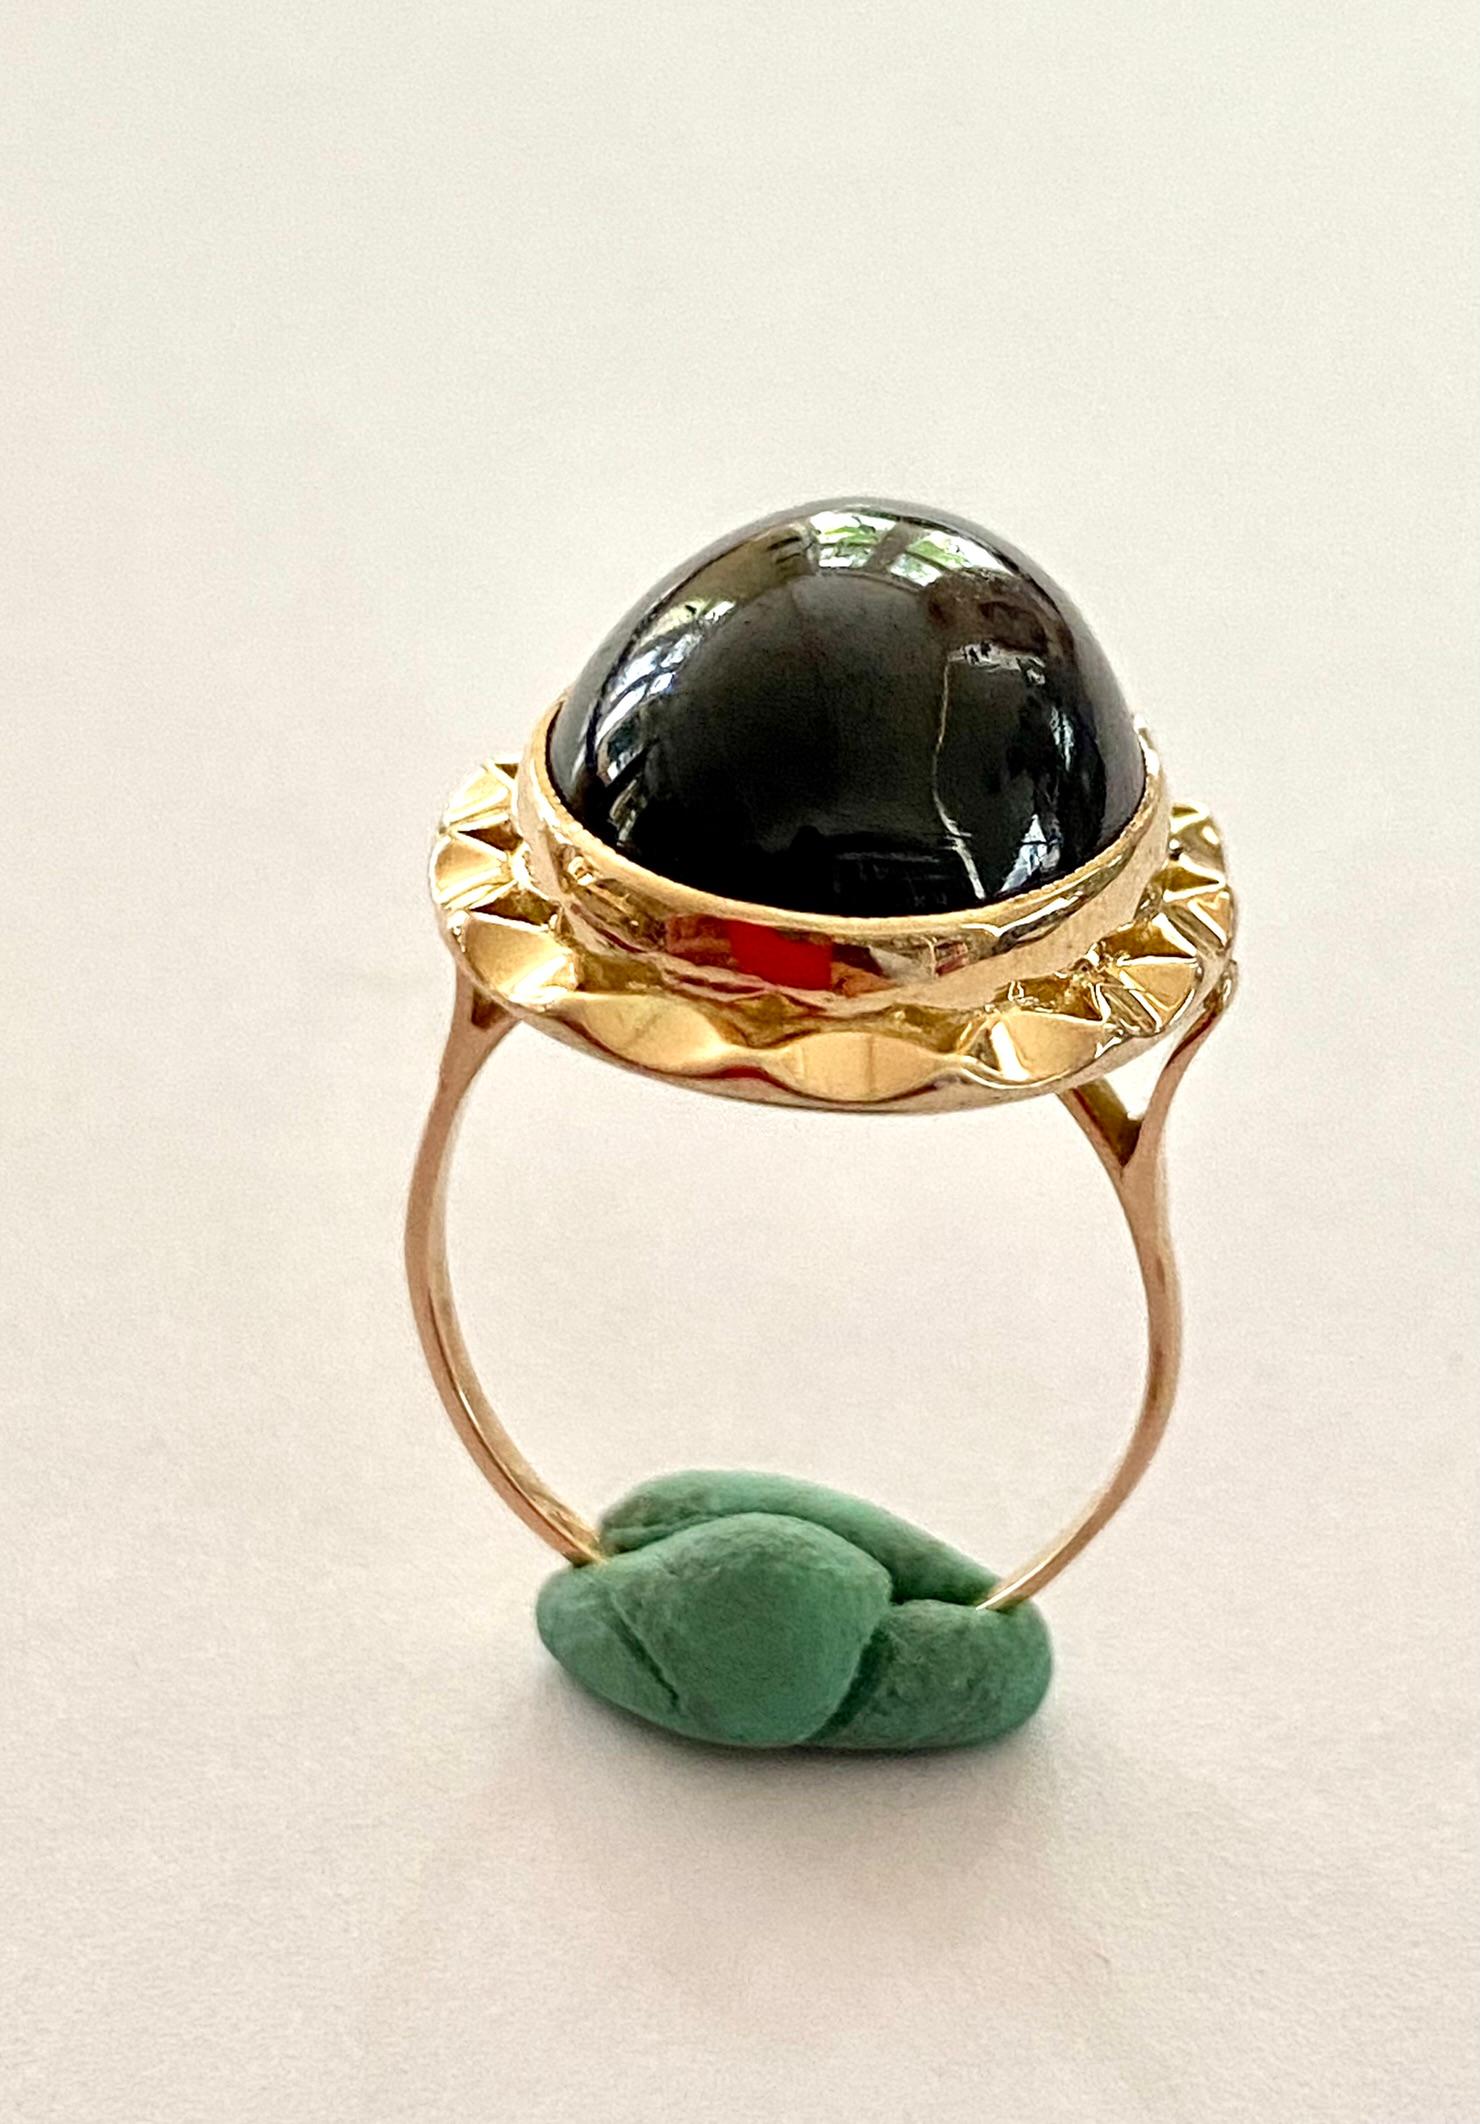 A 14K. yellow gold ring with an oval cut cabochon stone: Garnet.  (RHODOLITE)
Made in the Netherlands around 1960 (vintage)
size garnet: 17 x 12 mm (0.8 x 0.5 inch) the stone looks neat, but with the loupe you can see some signs of wear.
Rhodolit: